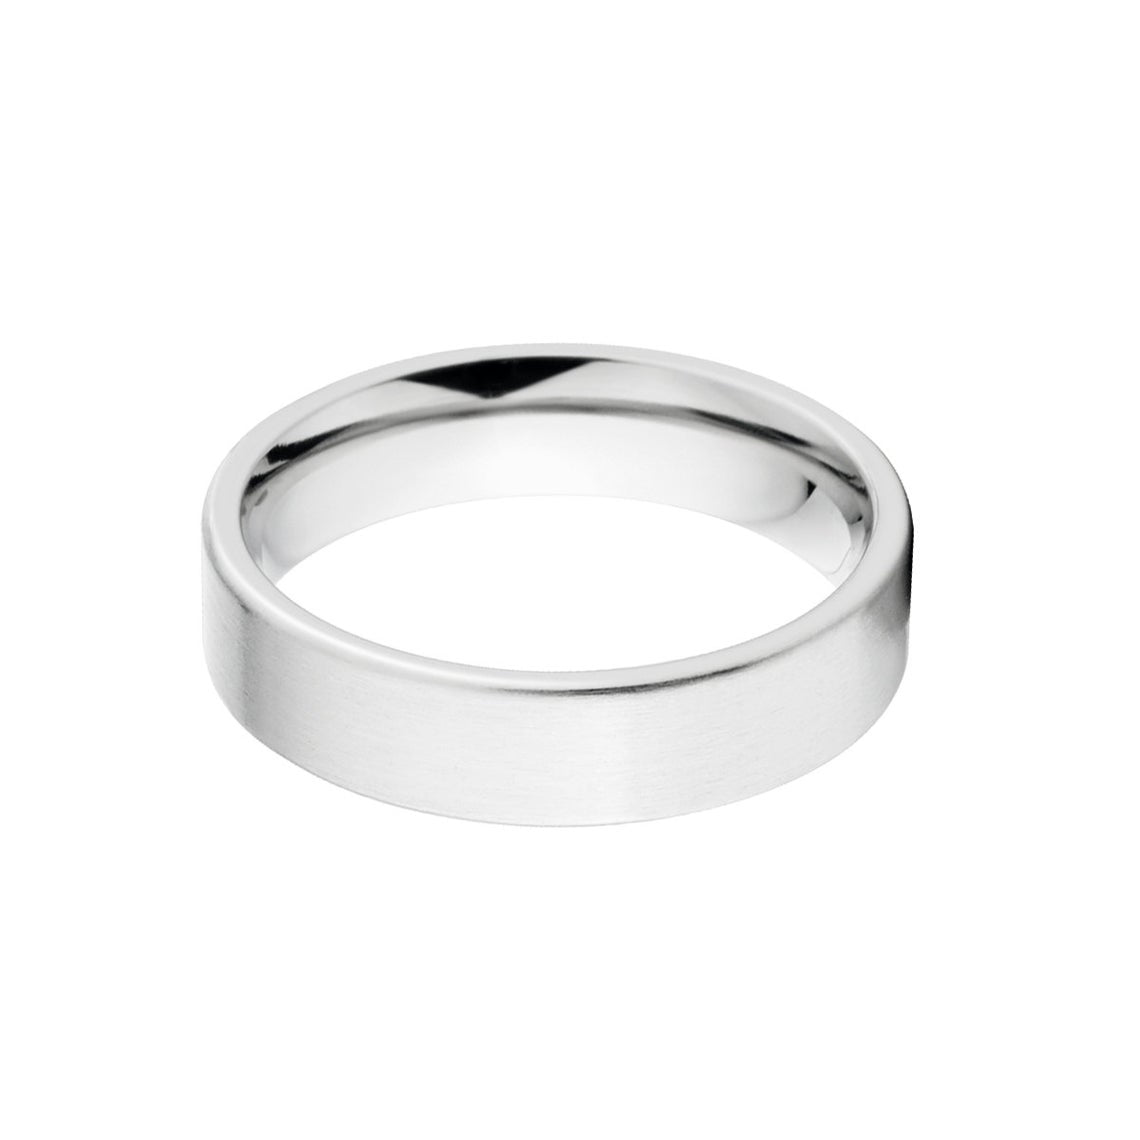 5mm wide cobalt wedding ring with a brush finish and flat profile